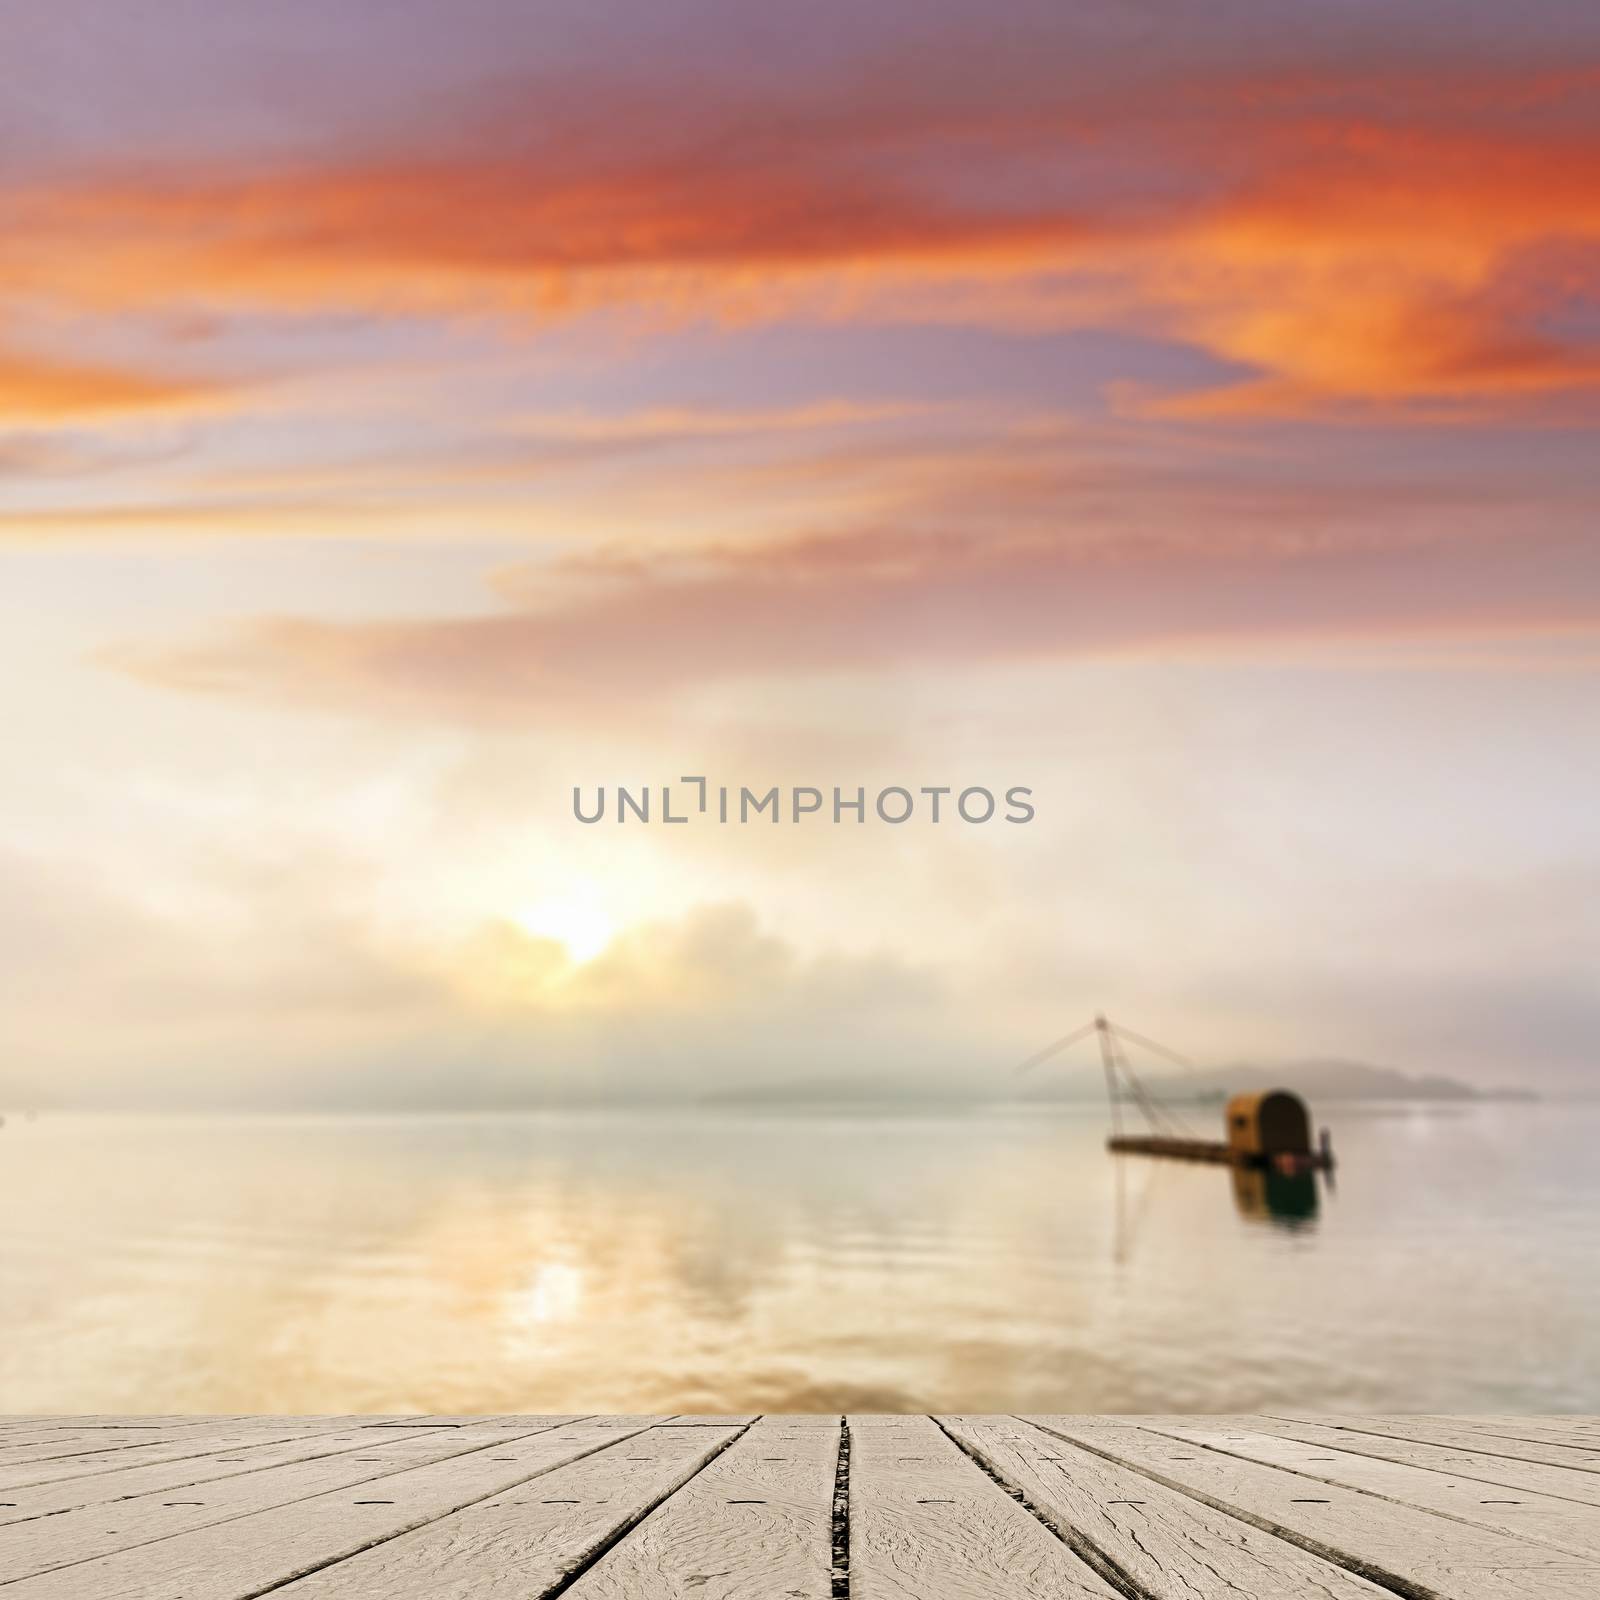 Morning concept with boat on lake with sunlight and dramatic sky, focus on wooden desk.